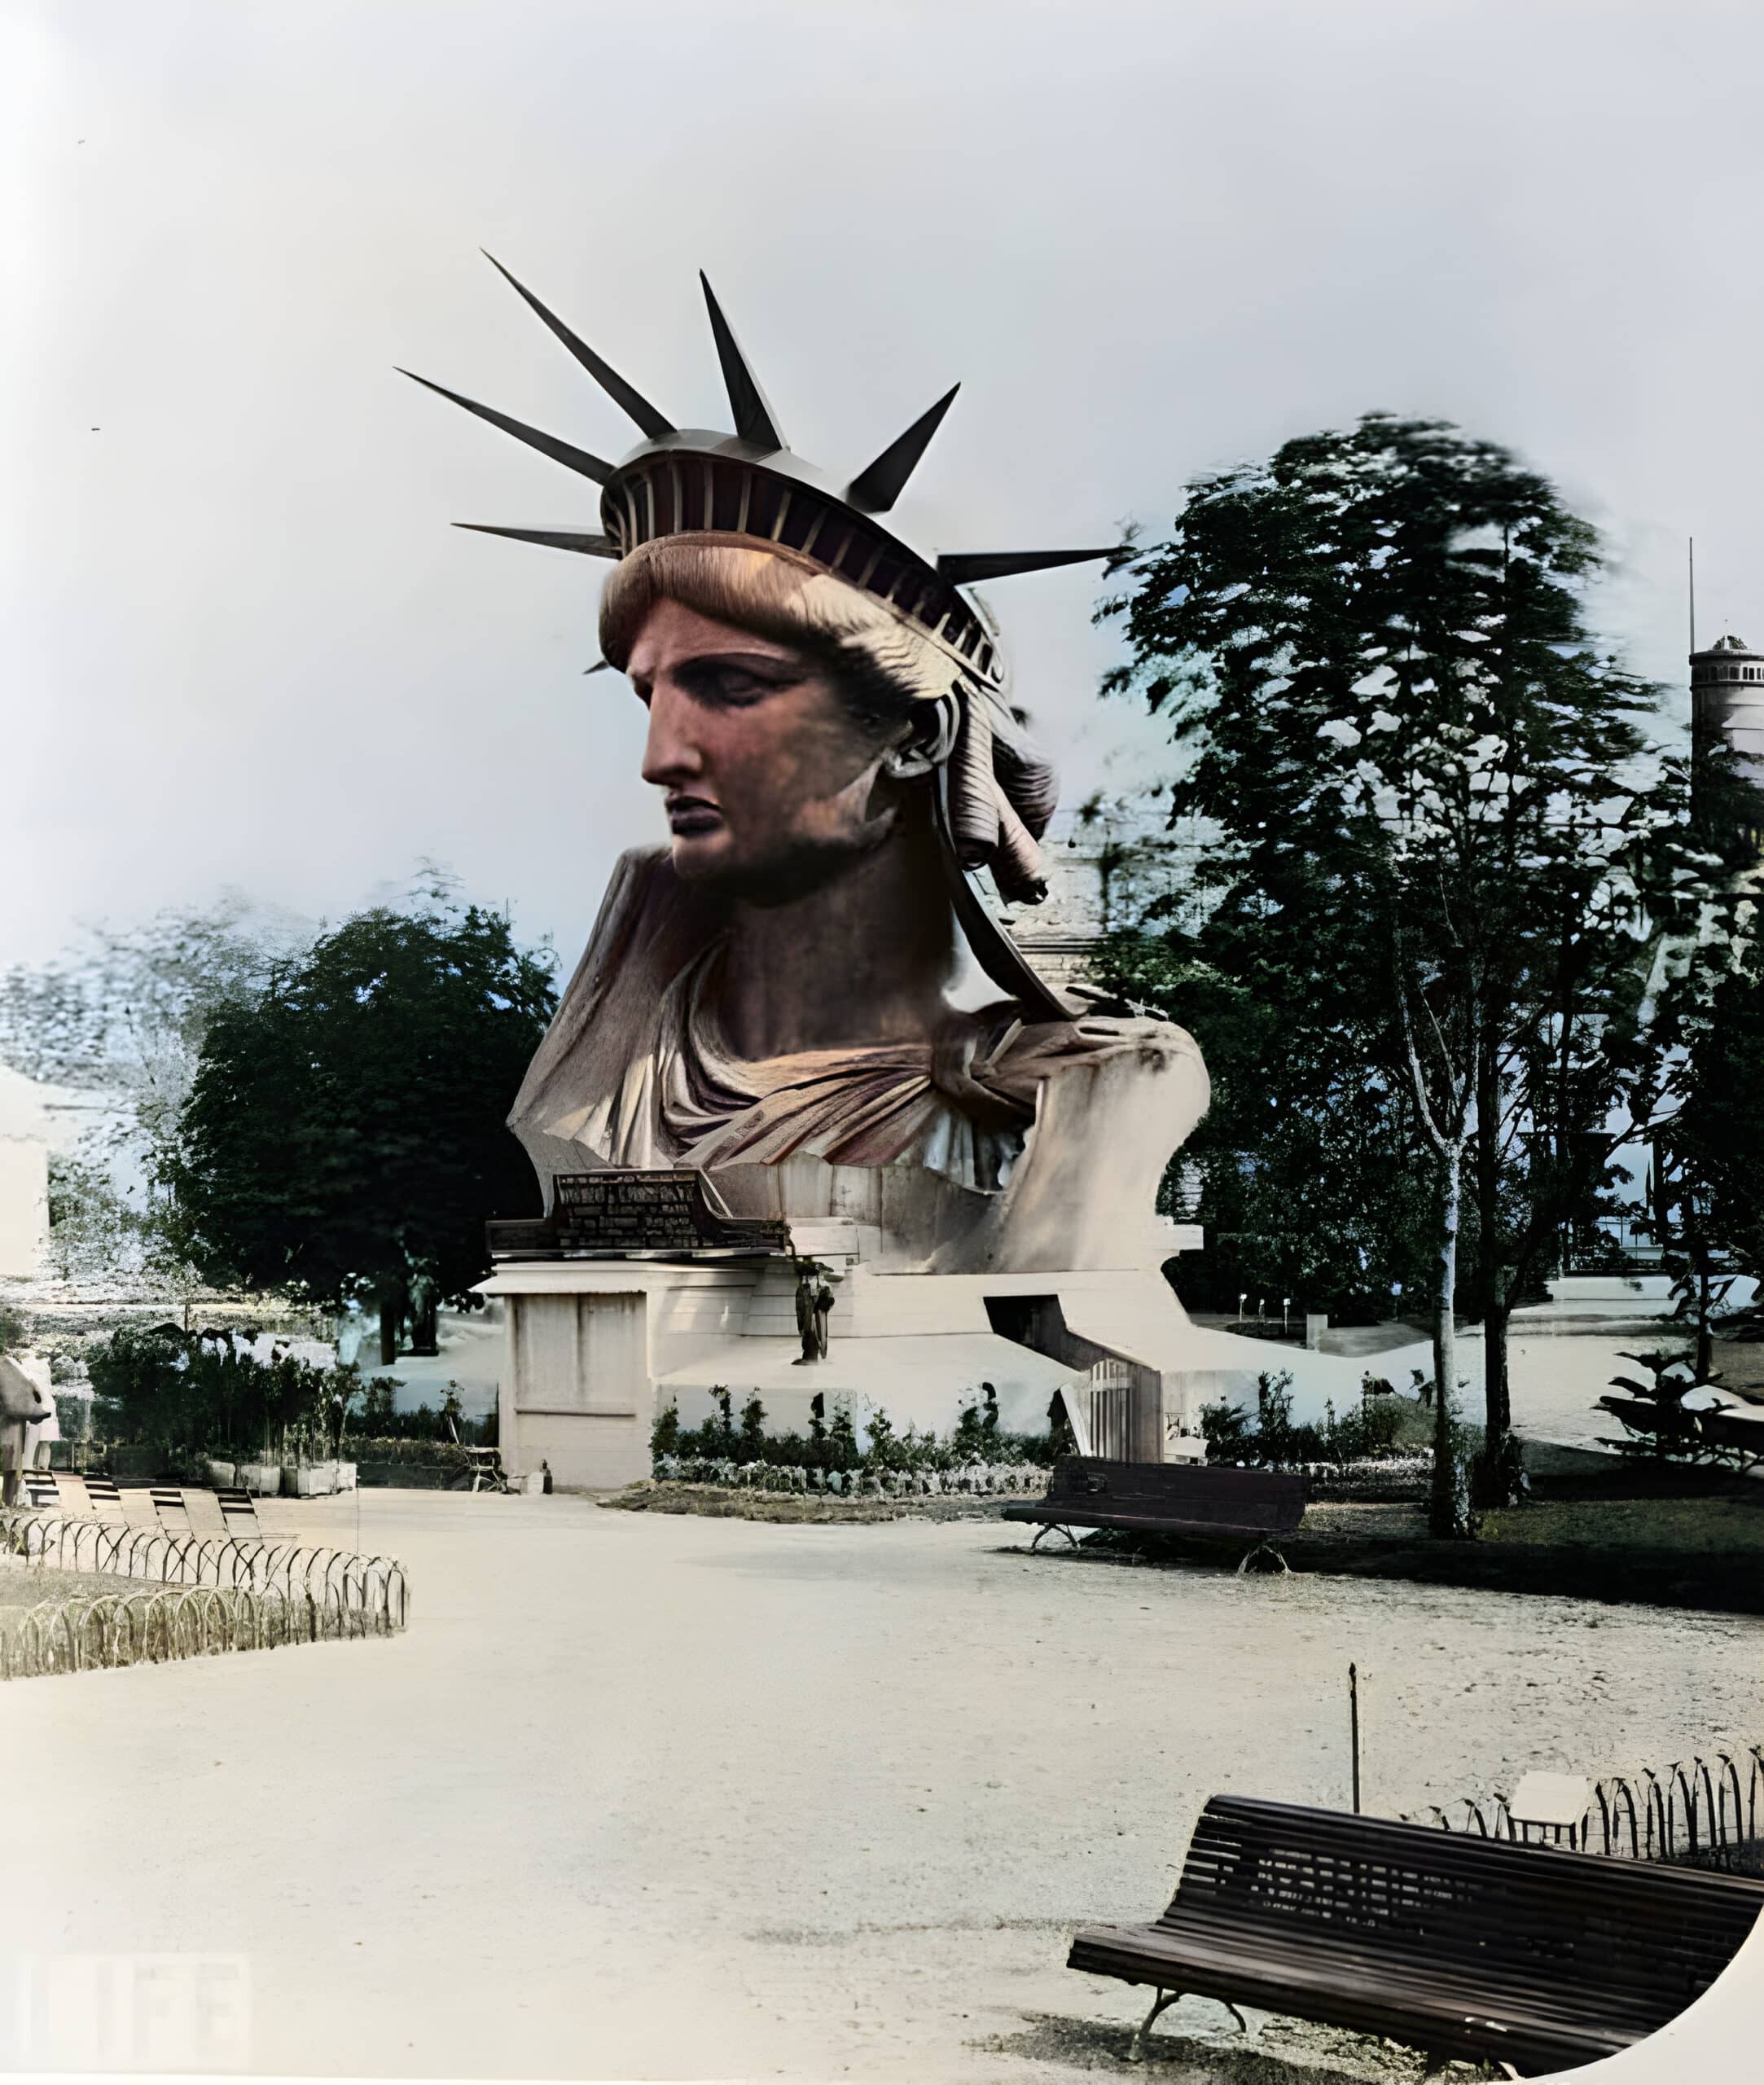 The statue of liberty in paris before being built. Colorised.